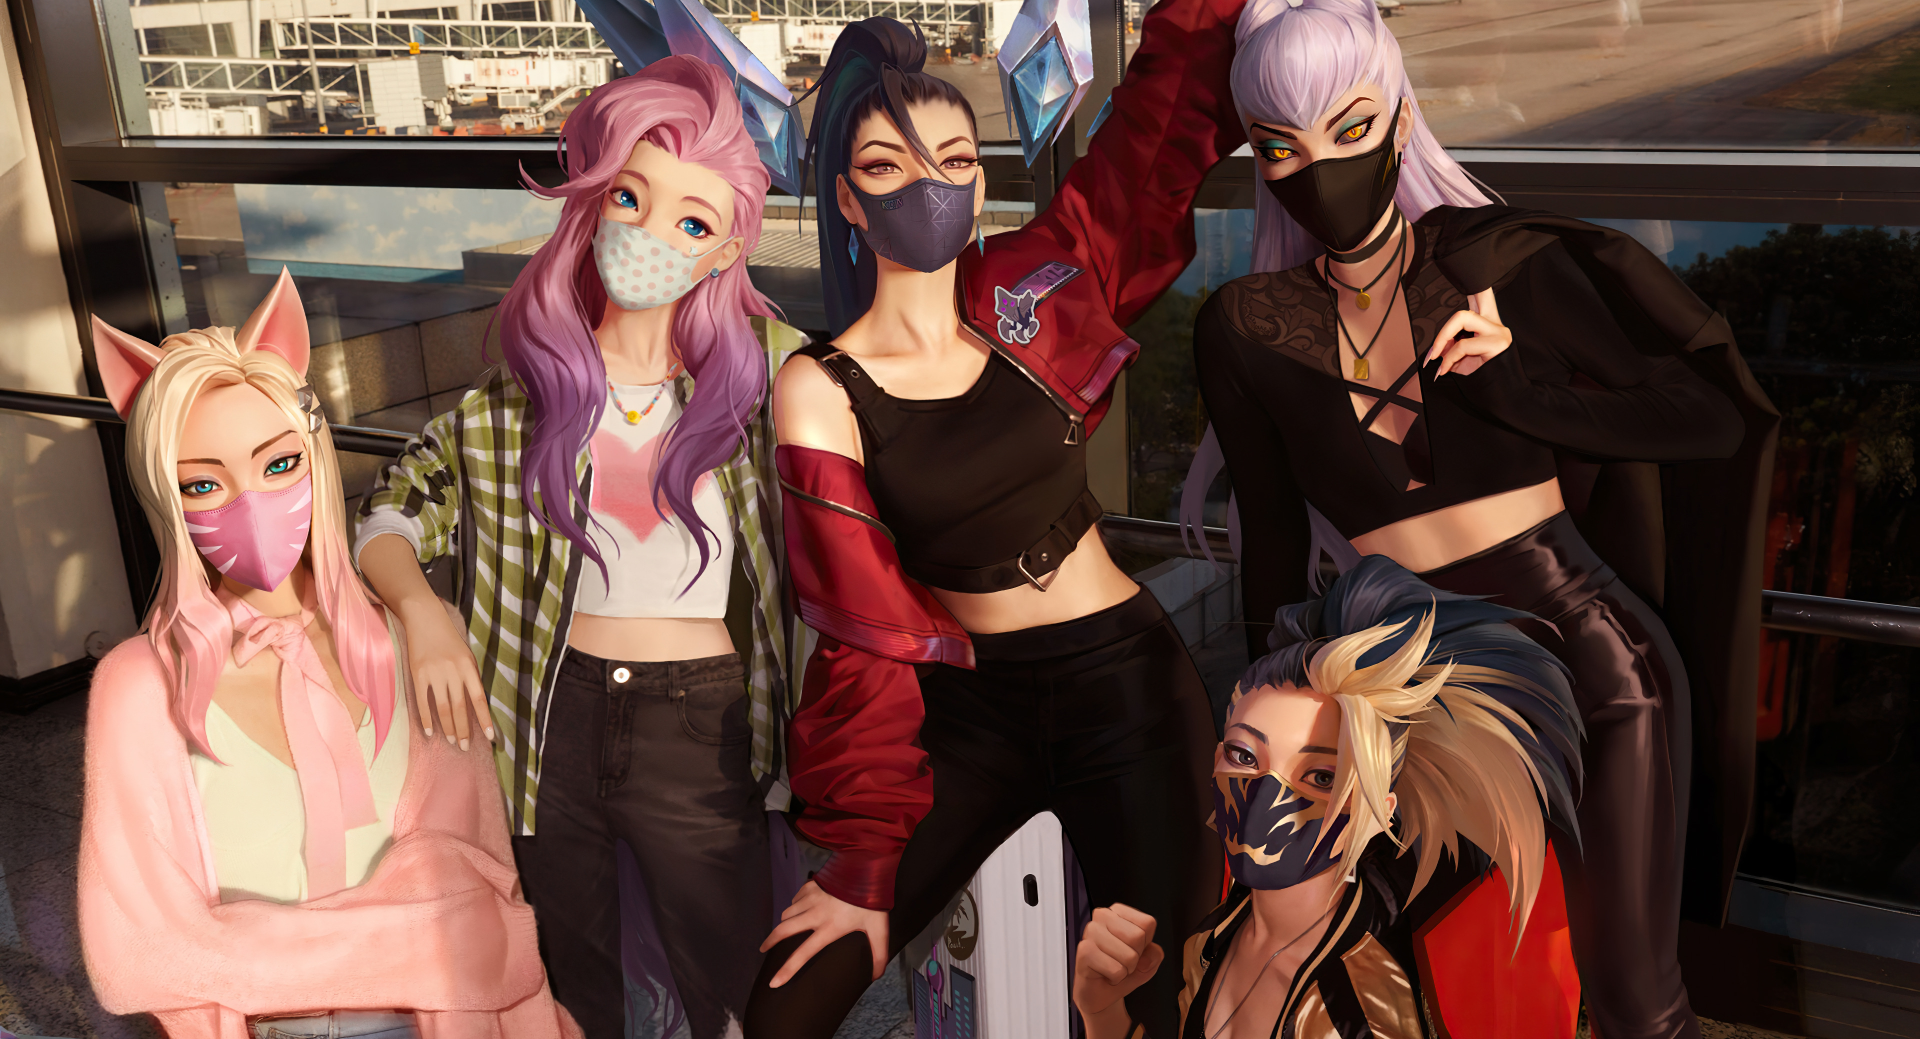 Group Of Women League Of Legends KDA Mask Fantasy Girl Animal Ears Video Game Girls Kudos Production 1920x1039